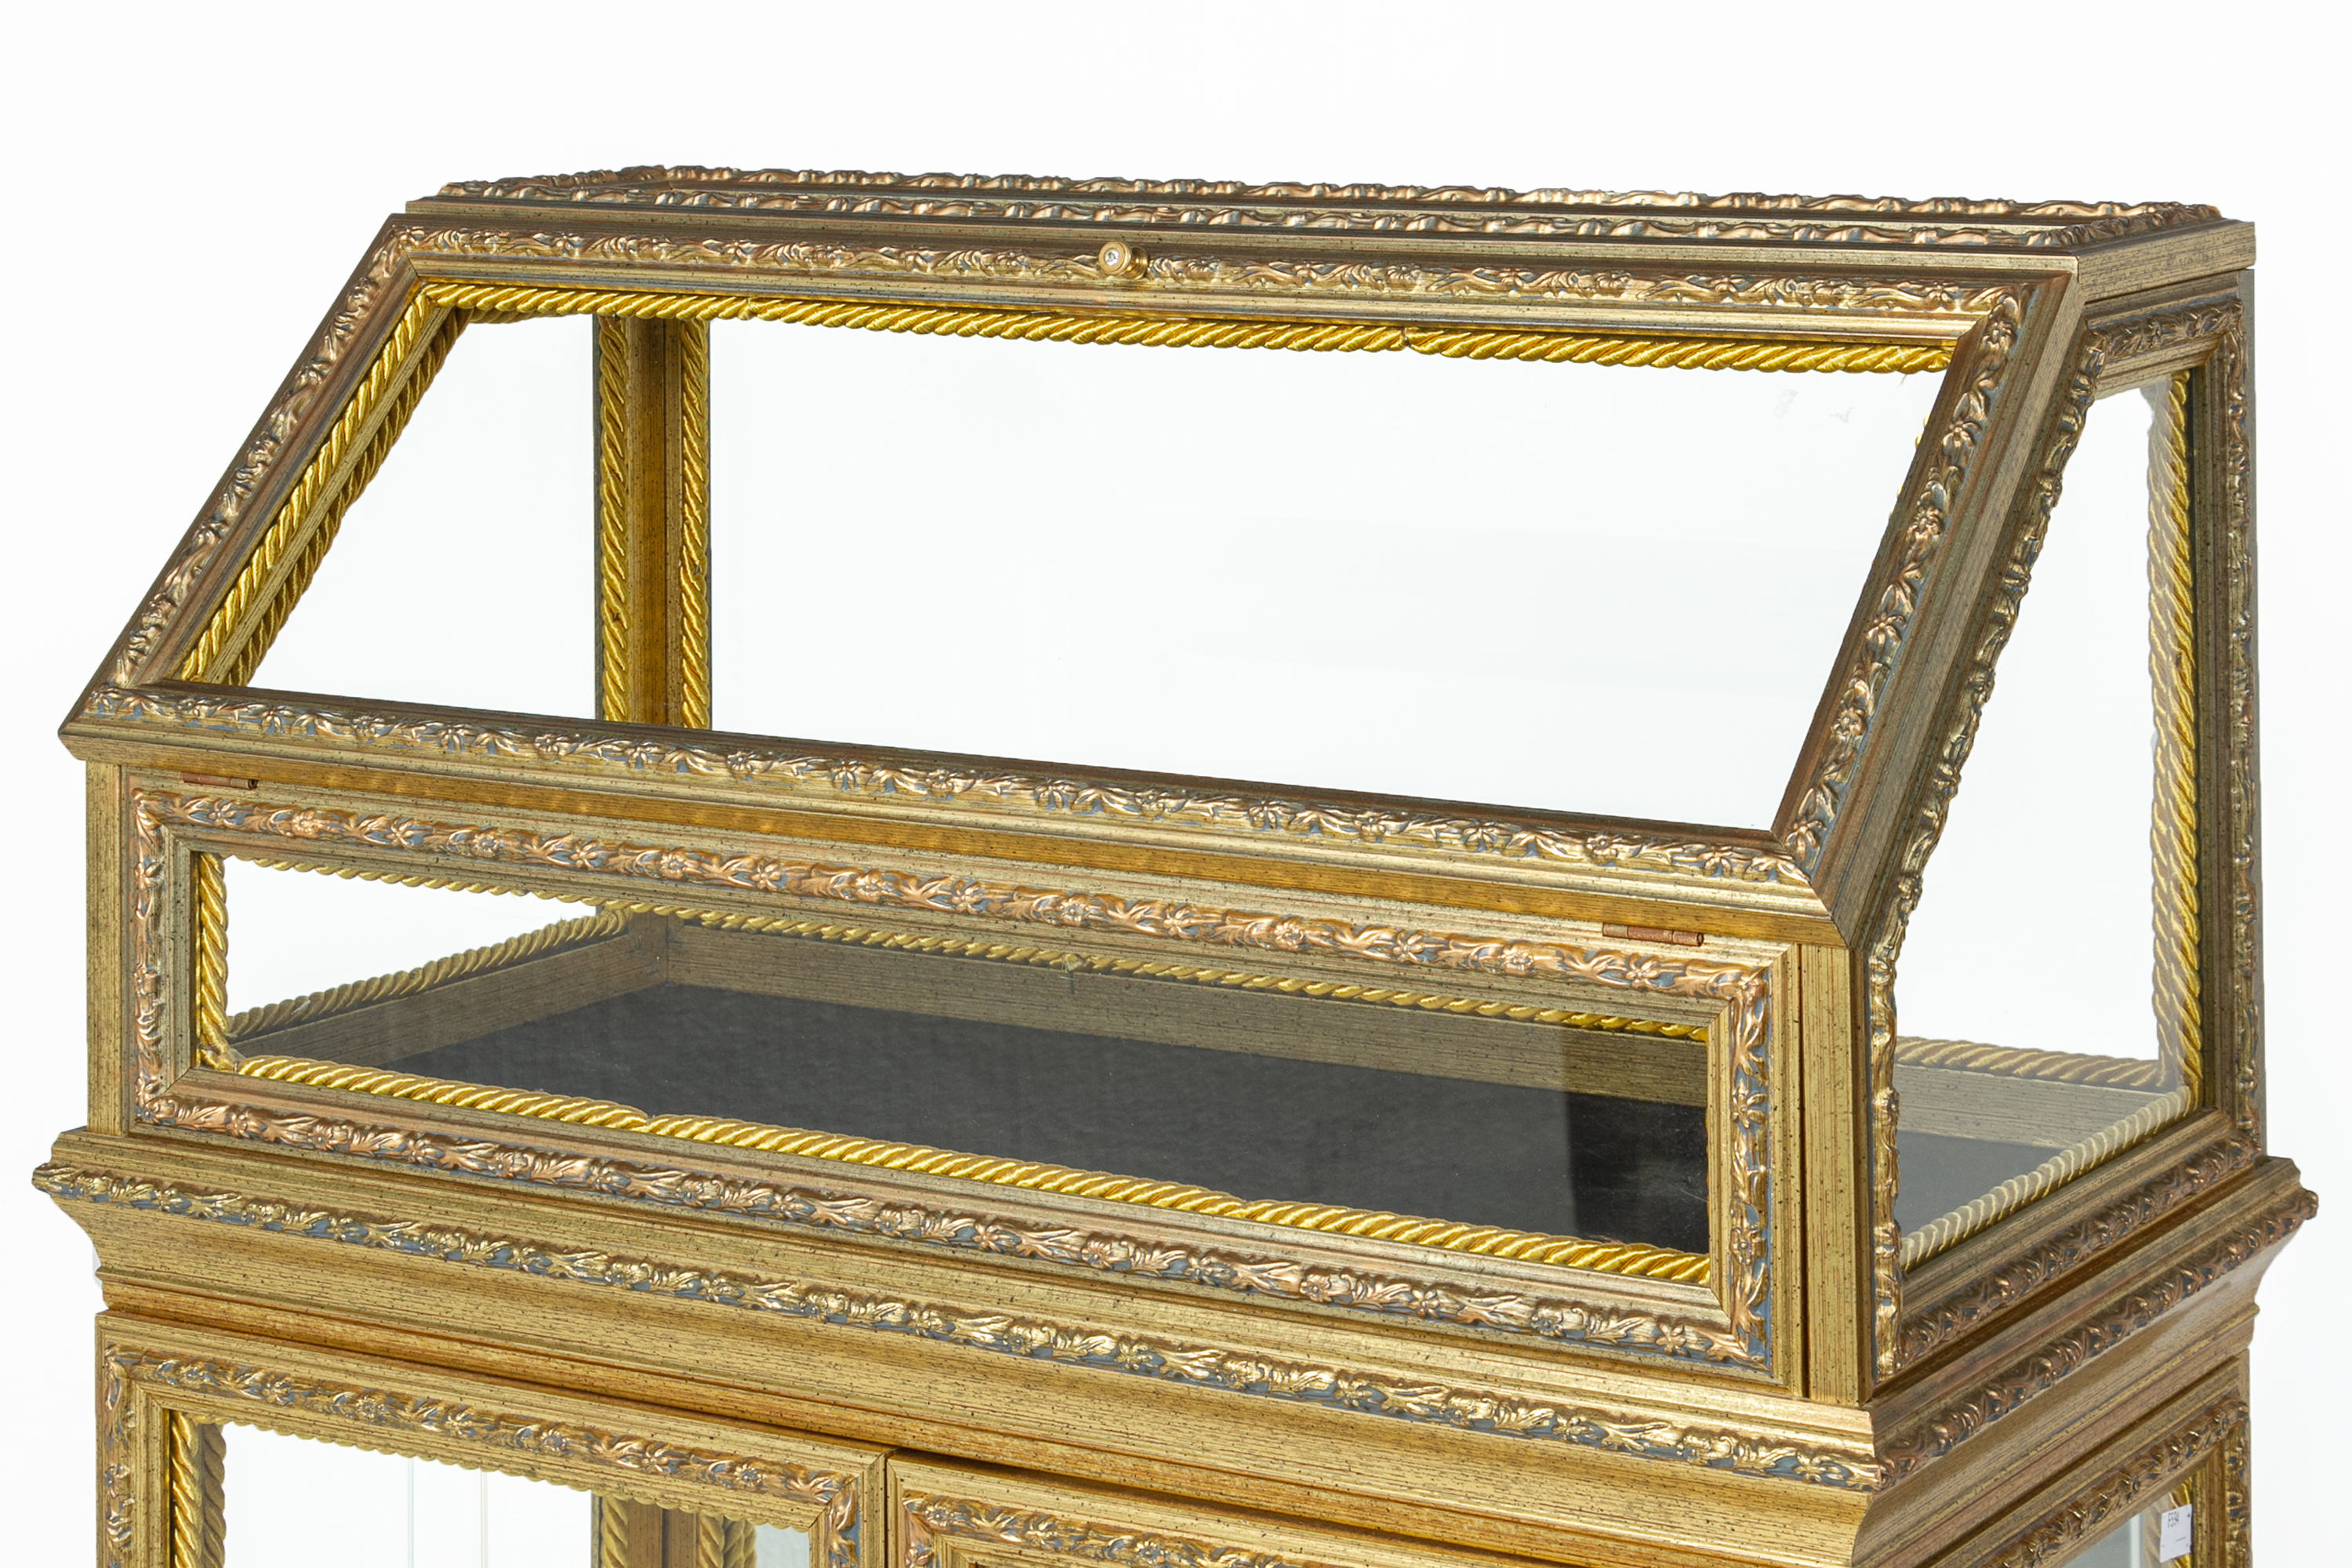 A PAIR OF ITALIAN GLAZED DISPLAY CABINETS BY DA VINCI - Image 3 of 4